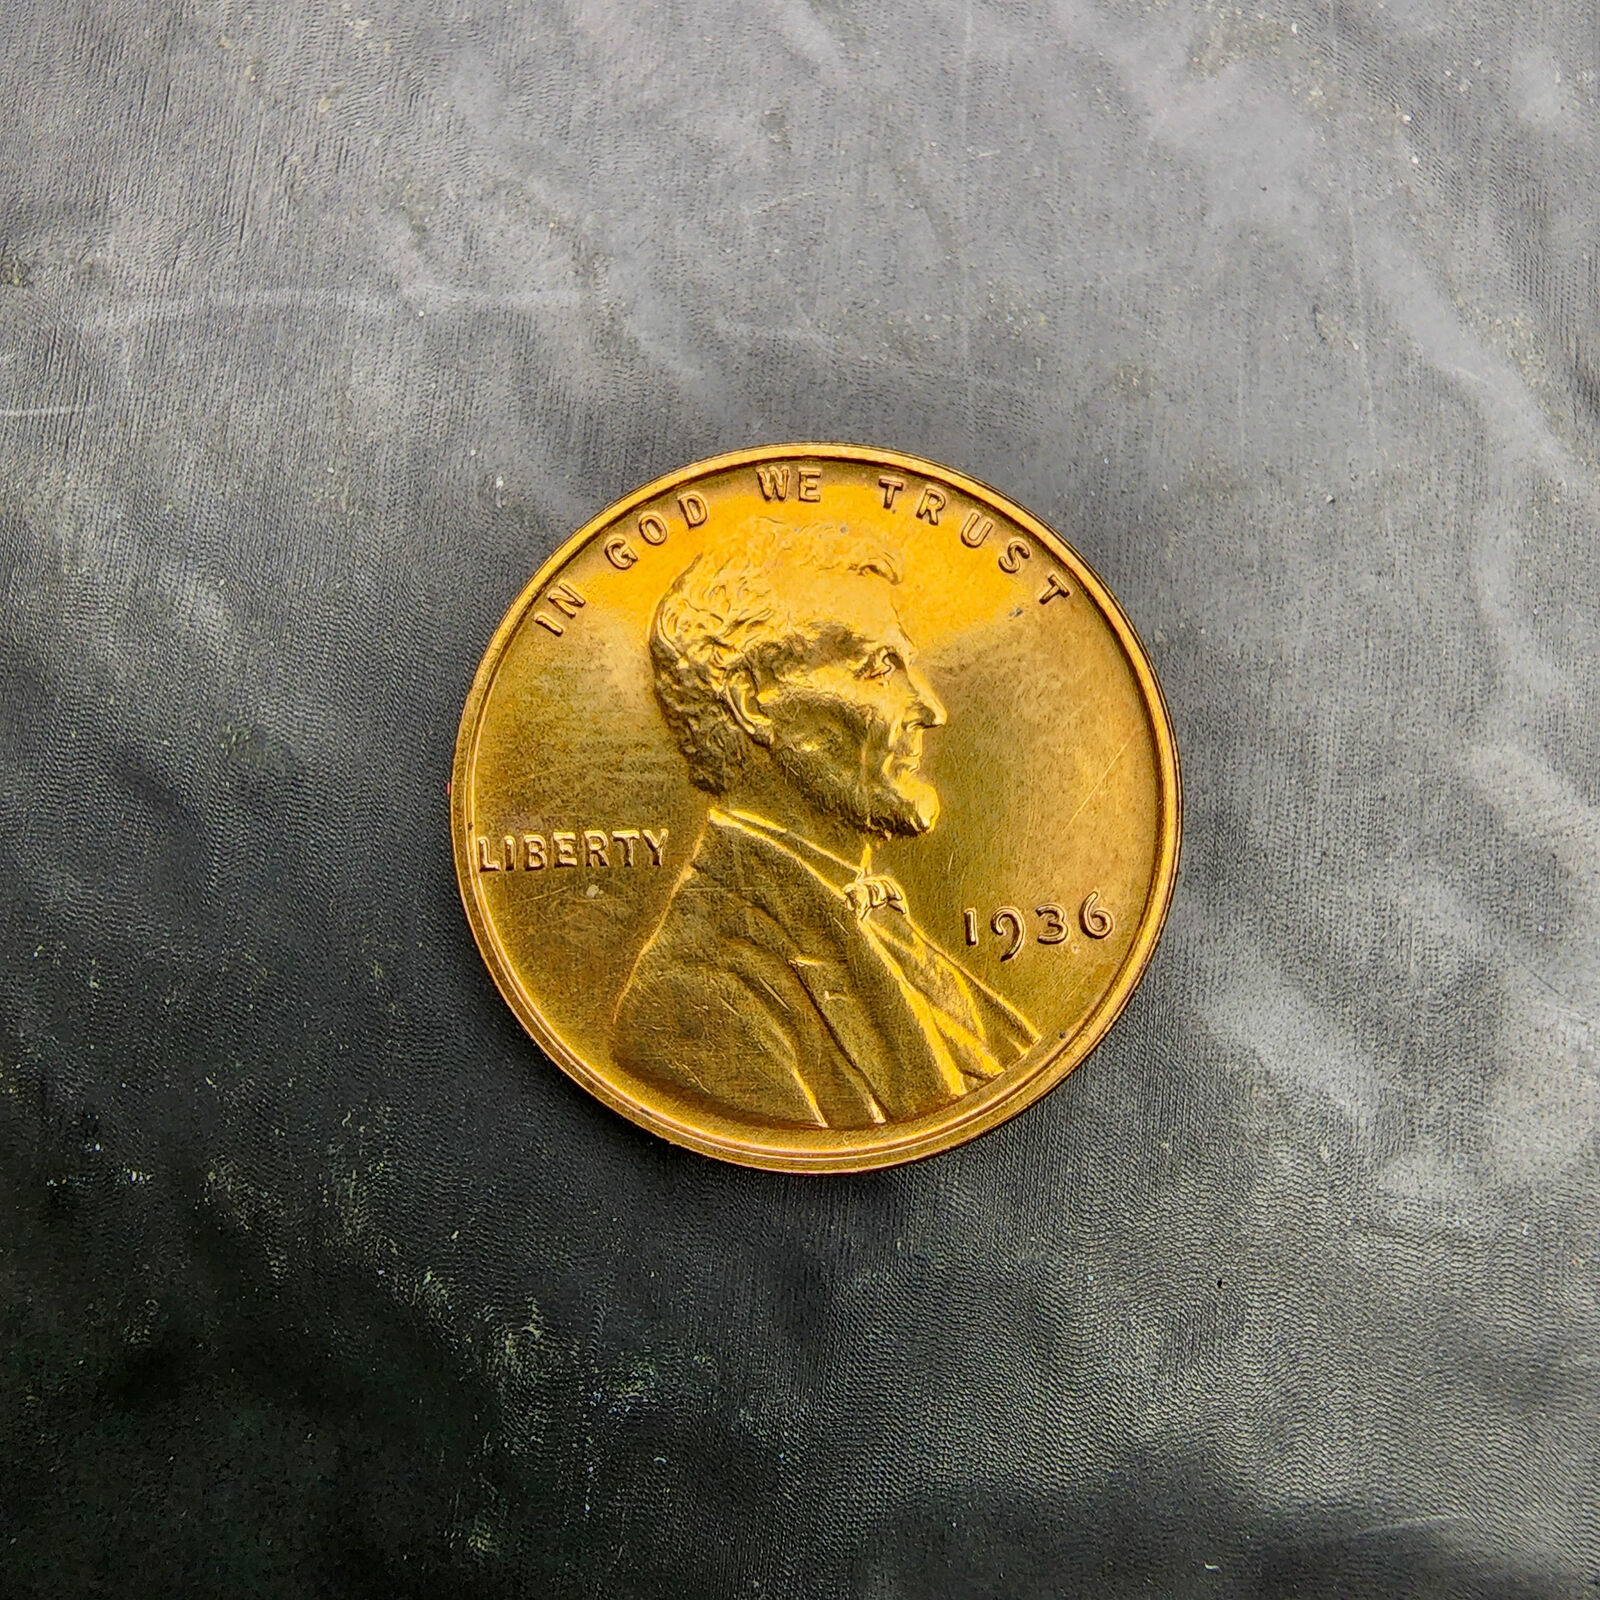 Rare 1936 Proof Lincoln Cent Penny Coin - Low Mintage Collectible Item